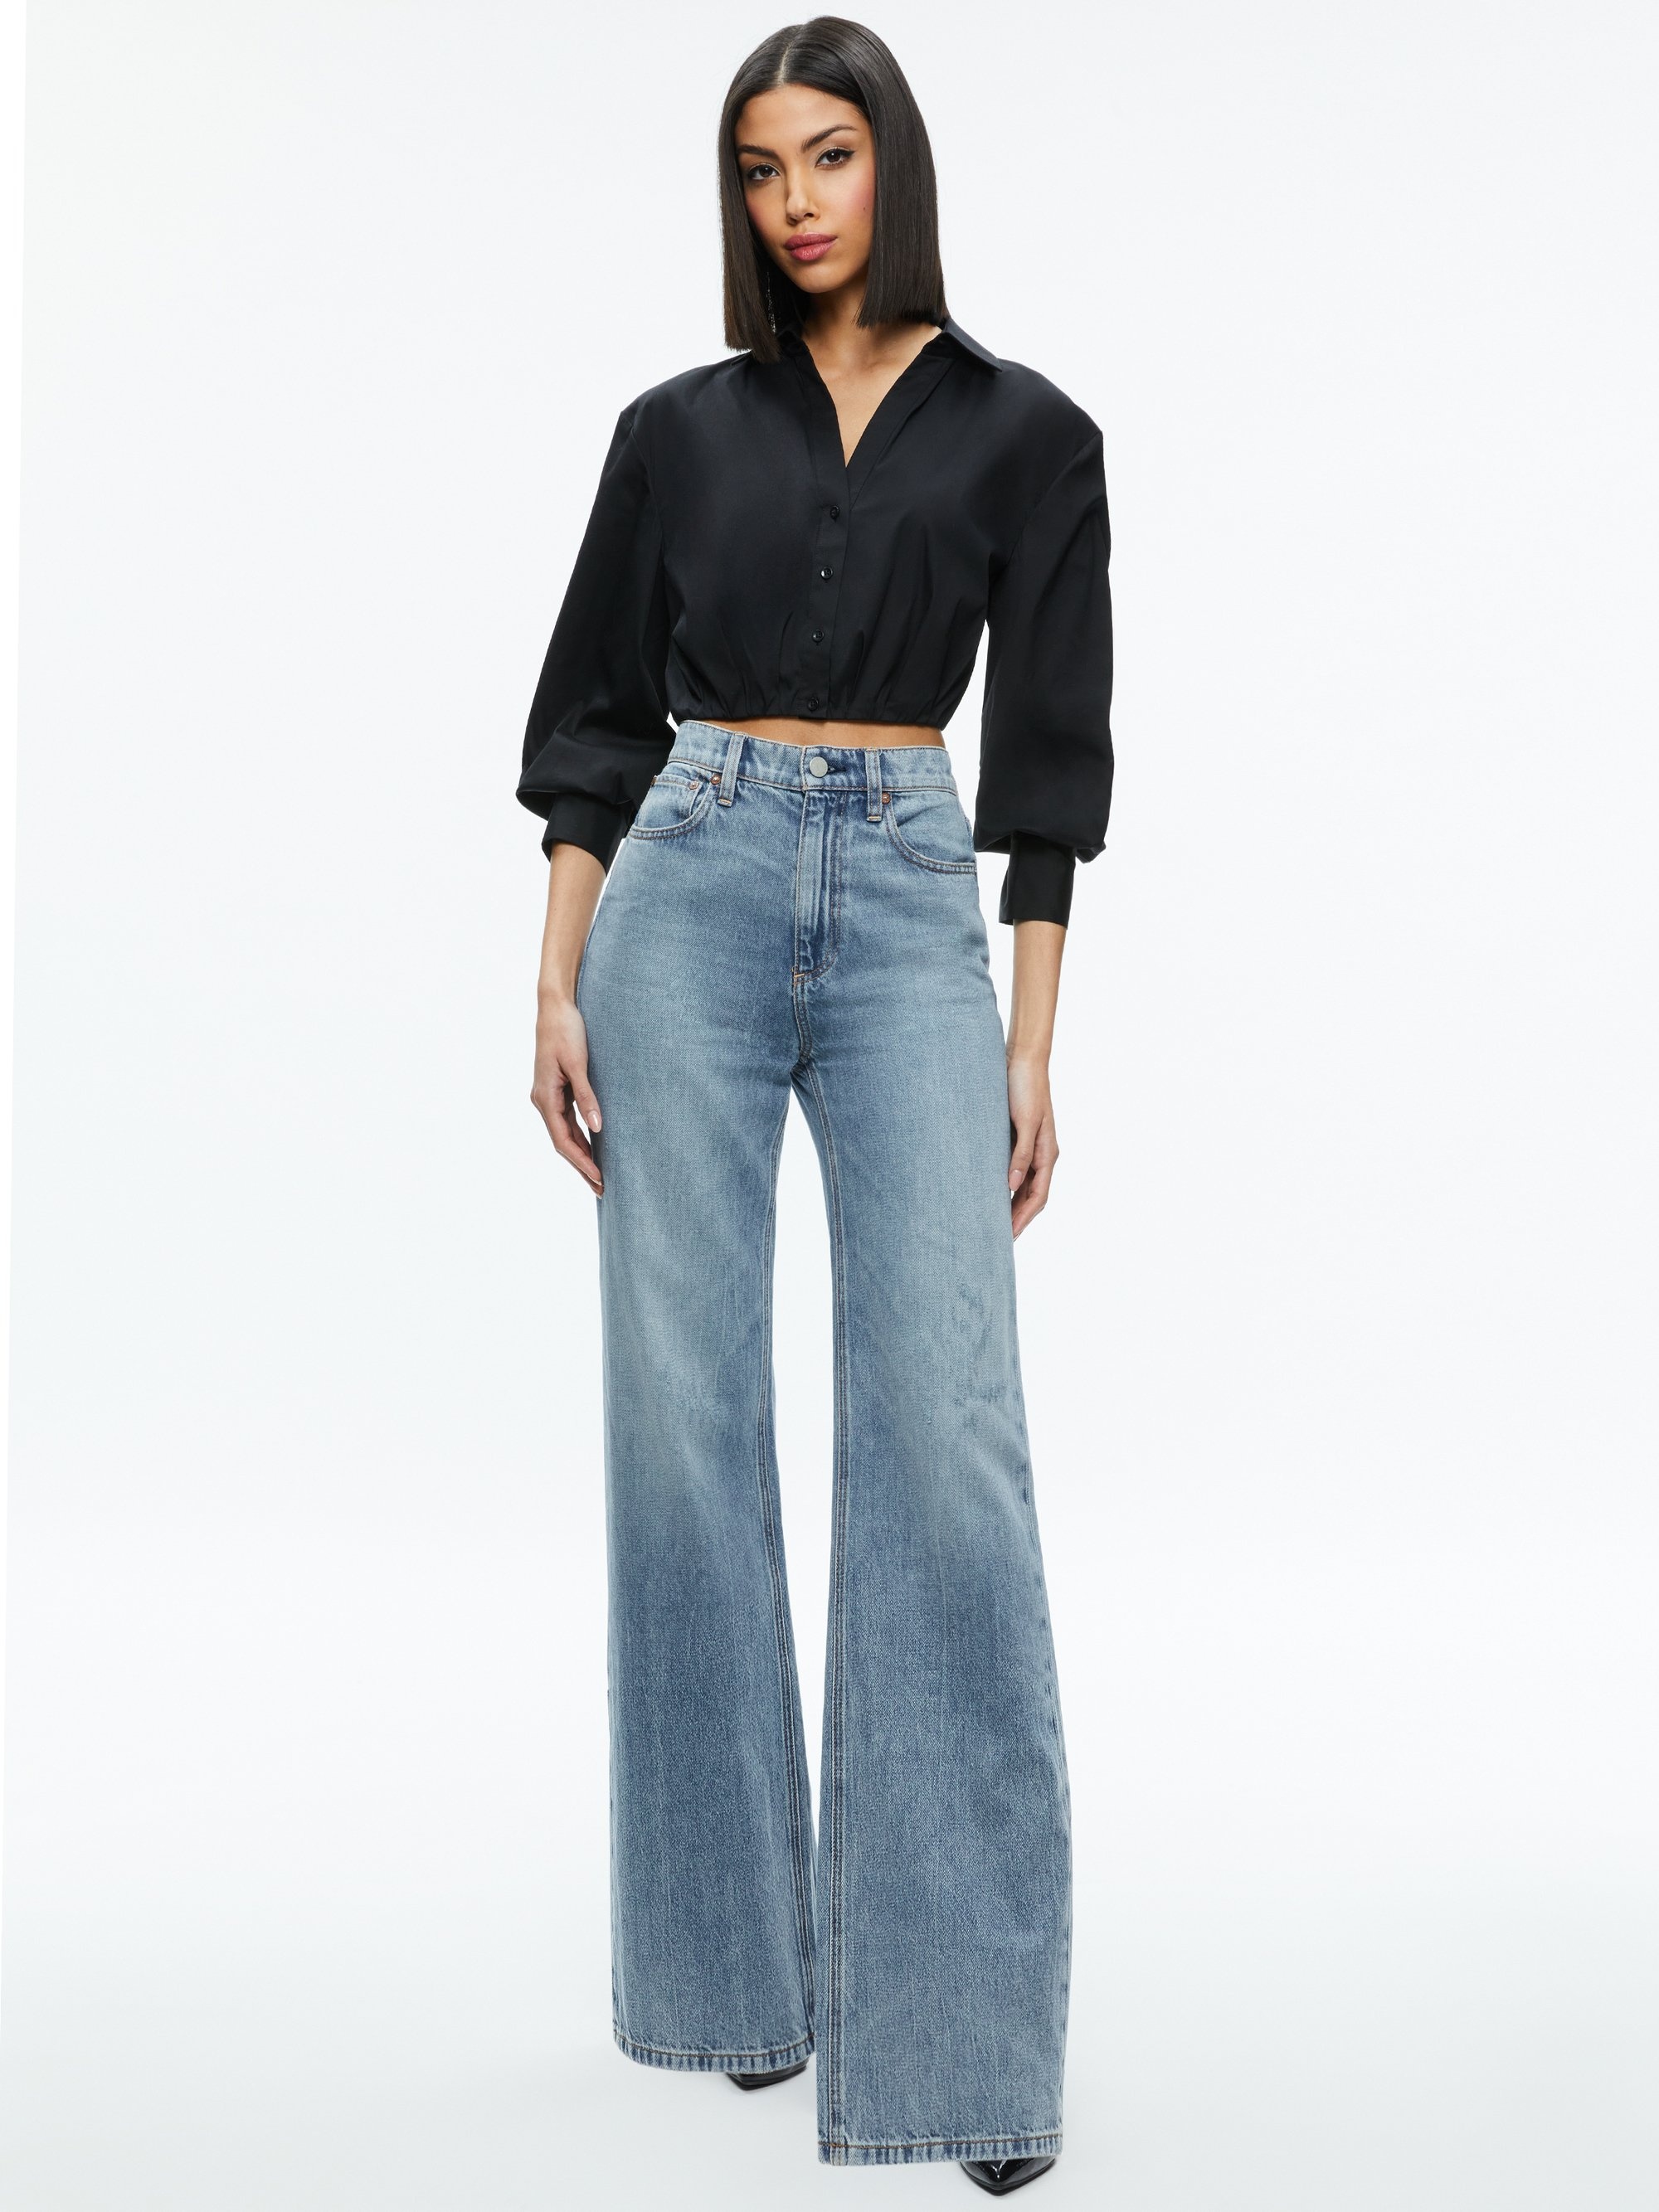 TRUDY CROPPED BUTTON DOWN - 4